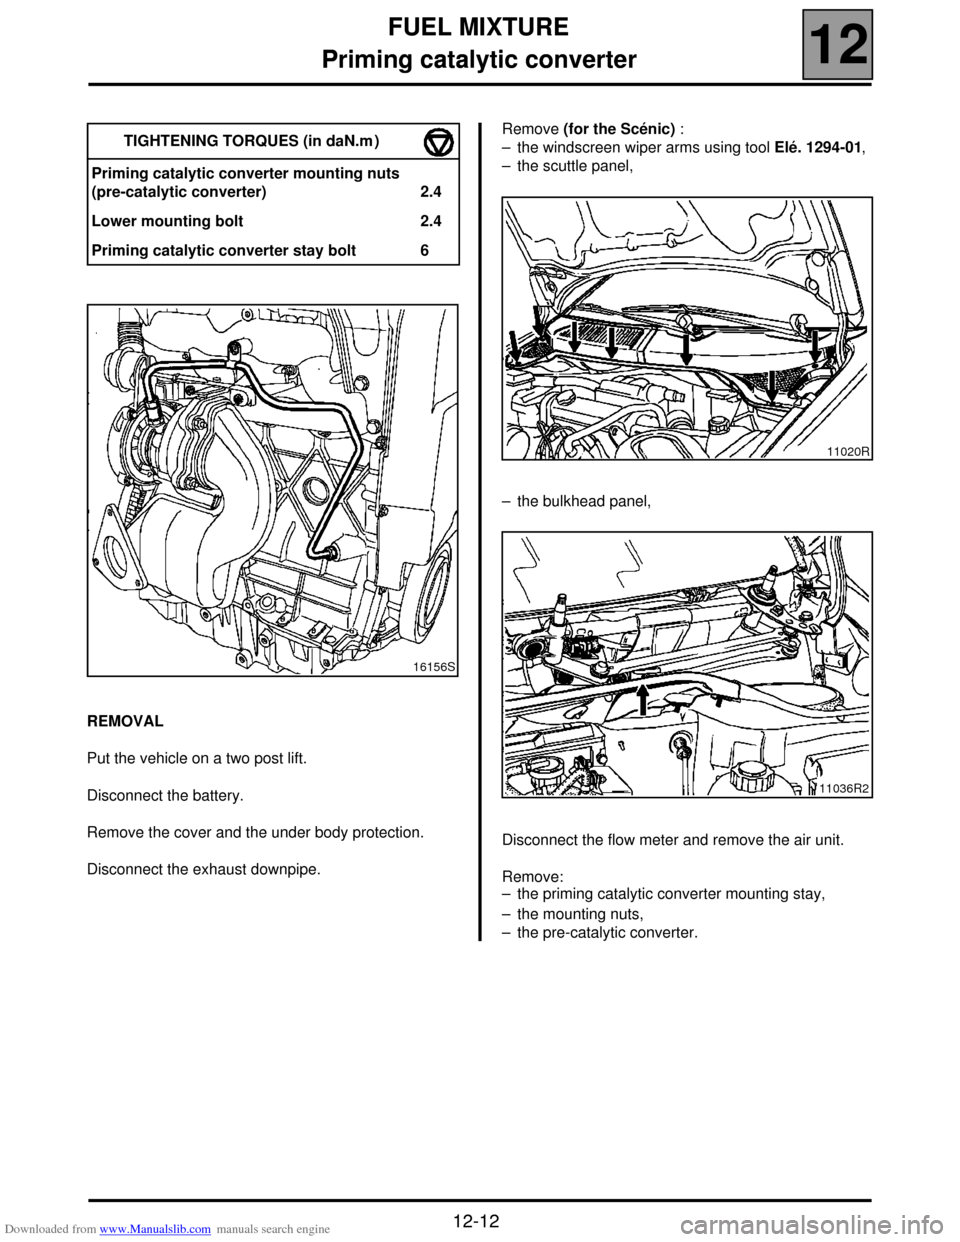 RENAULT SCENIC 2000 J64 / 1.G Technical Note 3426A Service Manual Downloaded from www.Manualslib.com manuals search engine FUEL MIXTURE
Priming catalytic converter
12
12-12
Priming catalytic converter
REMOVAL
Put the vehicle on a two post lift.
Disconnect the batter